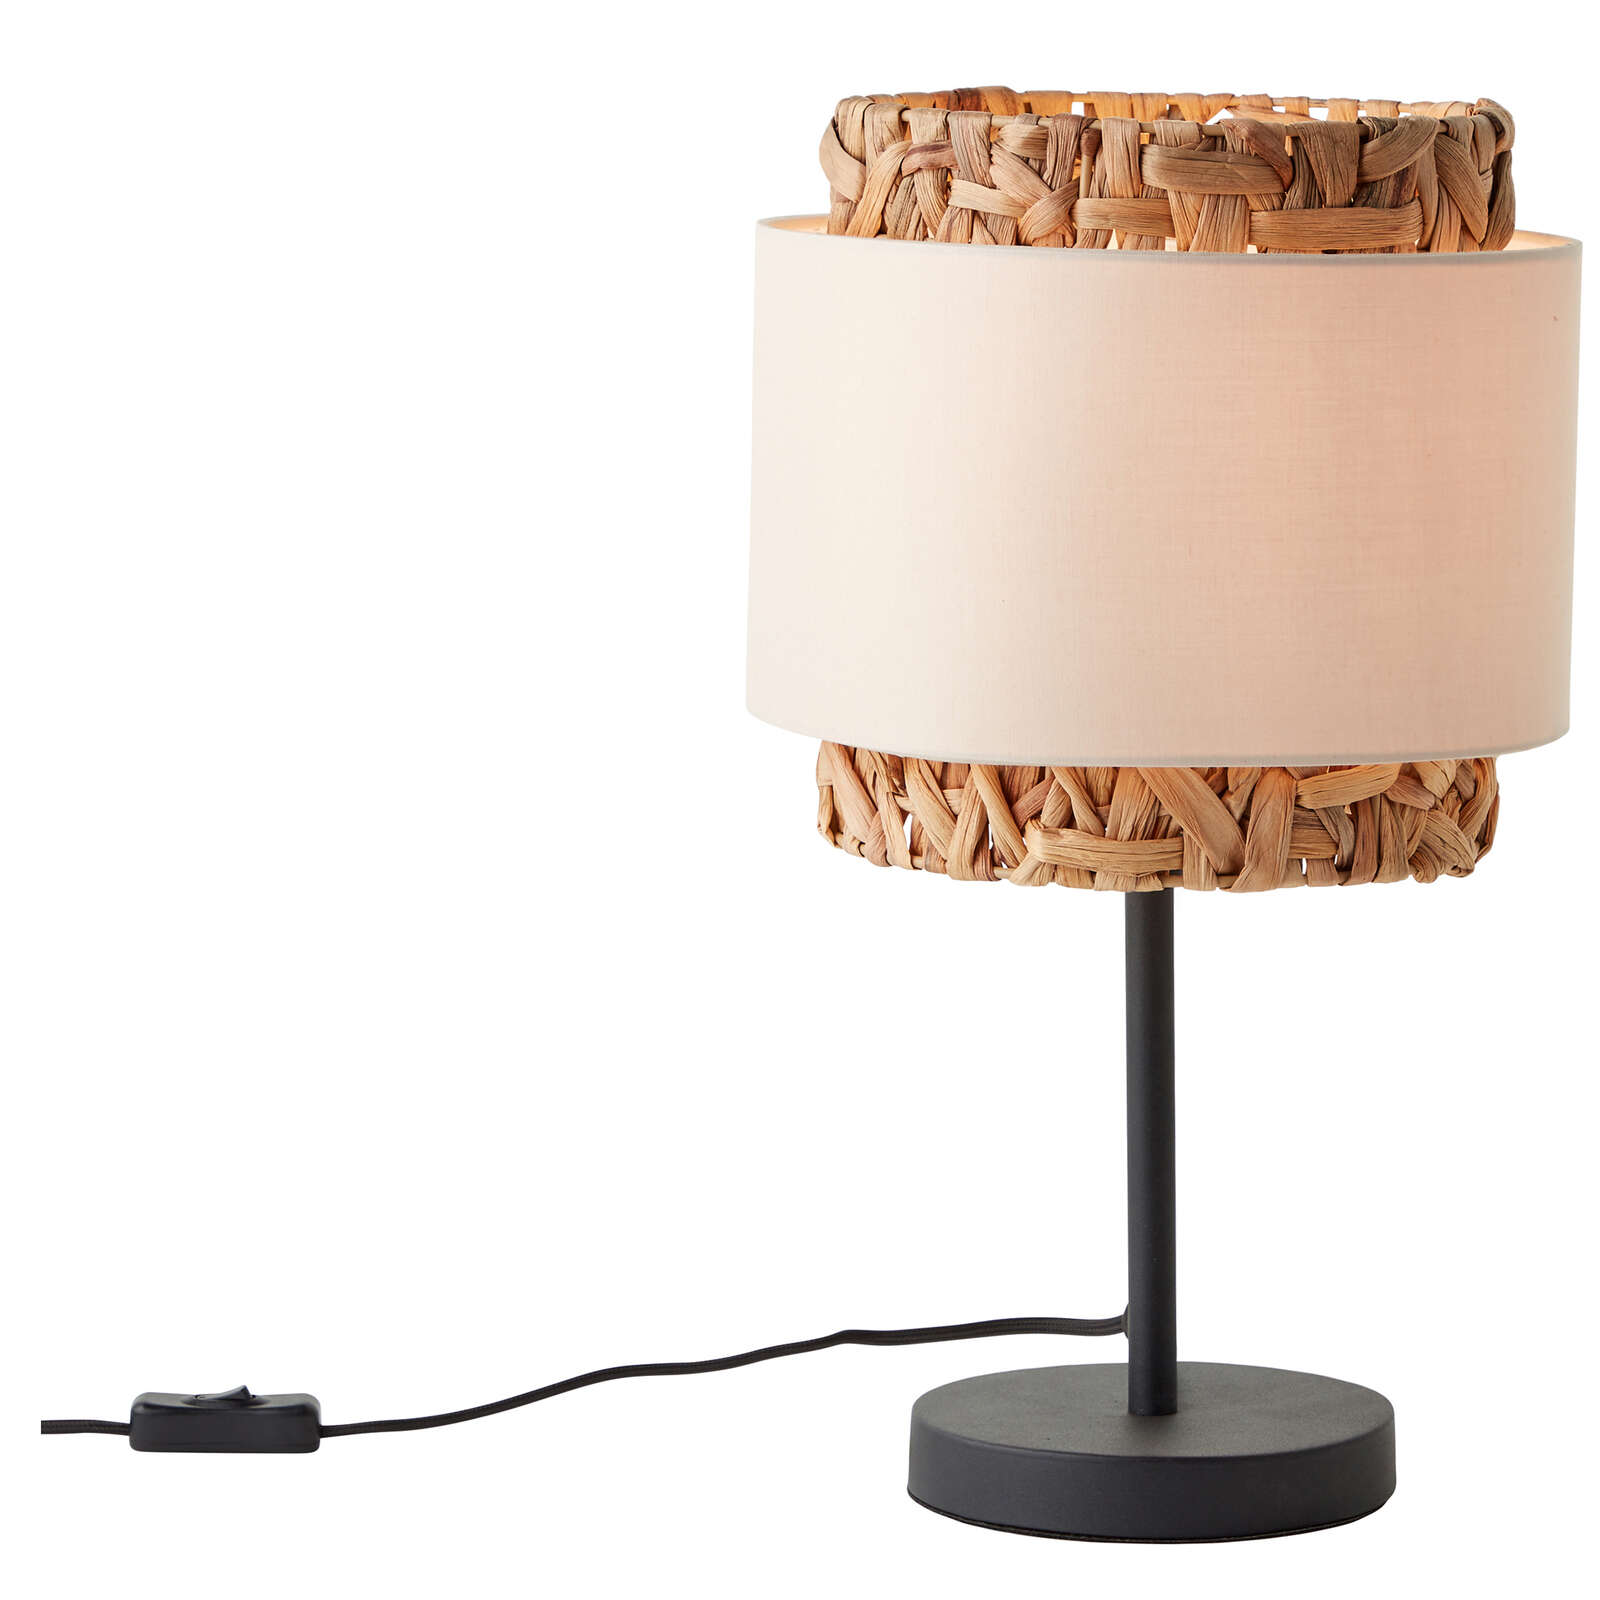             Textile table lamp - Till 1 - Brown
        